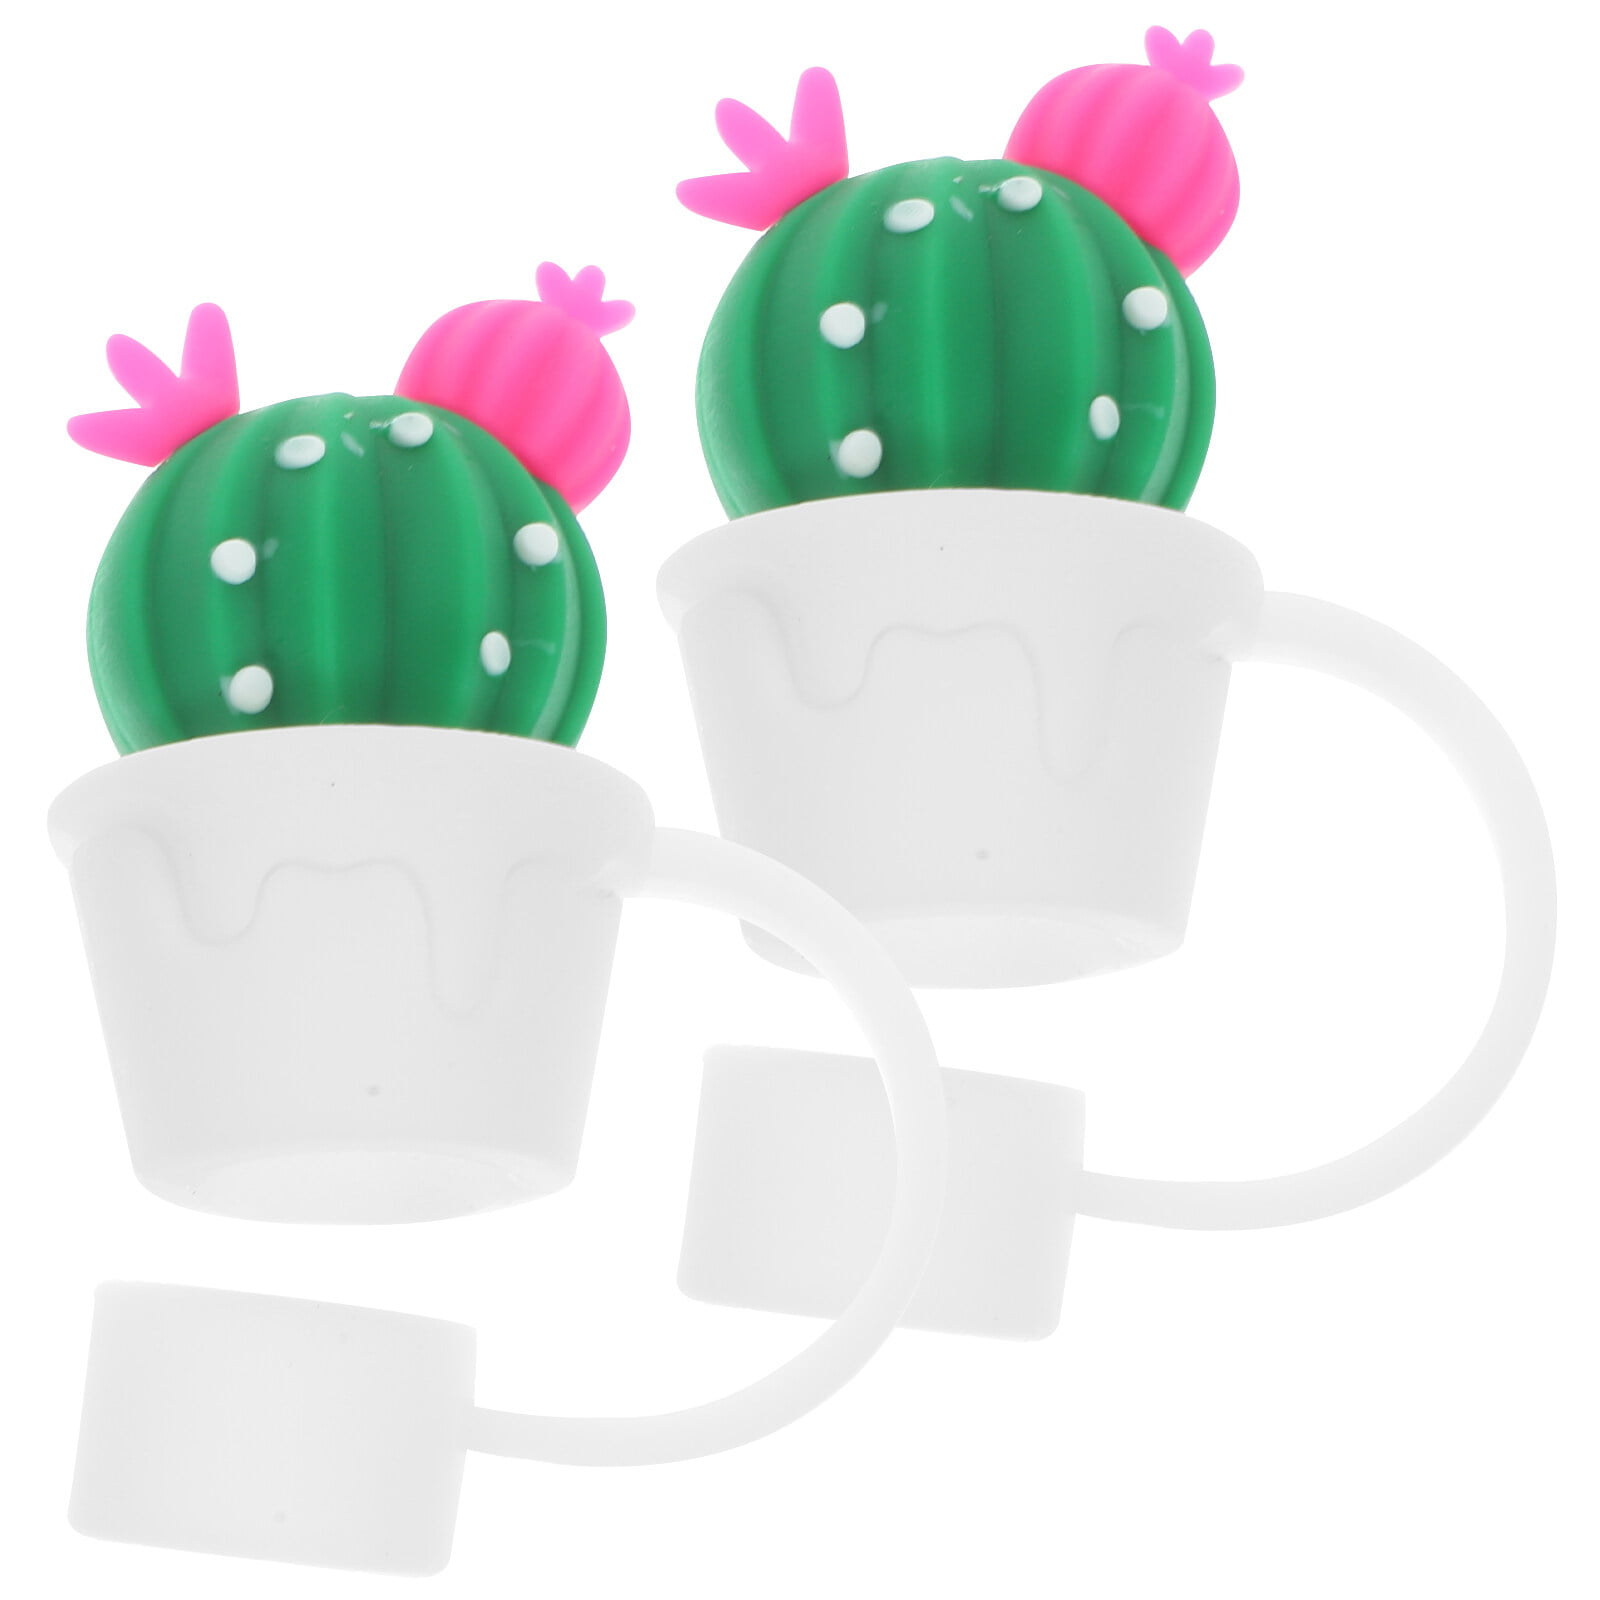 Cactus and Whale Tail Straw Toppers set of 3 for Tumbler, Straw